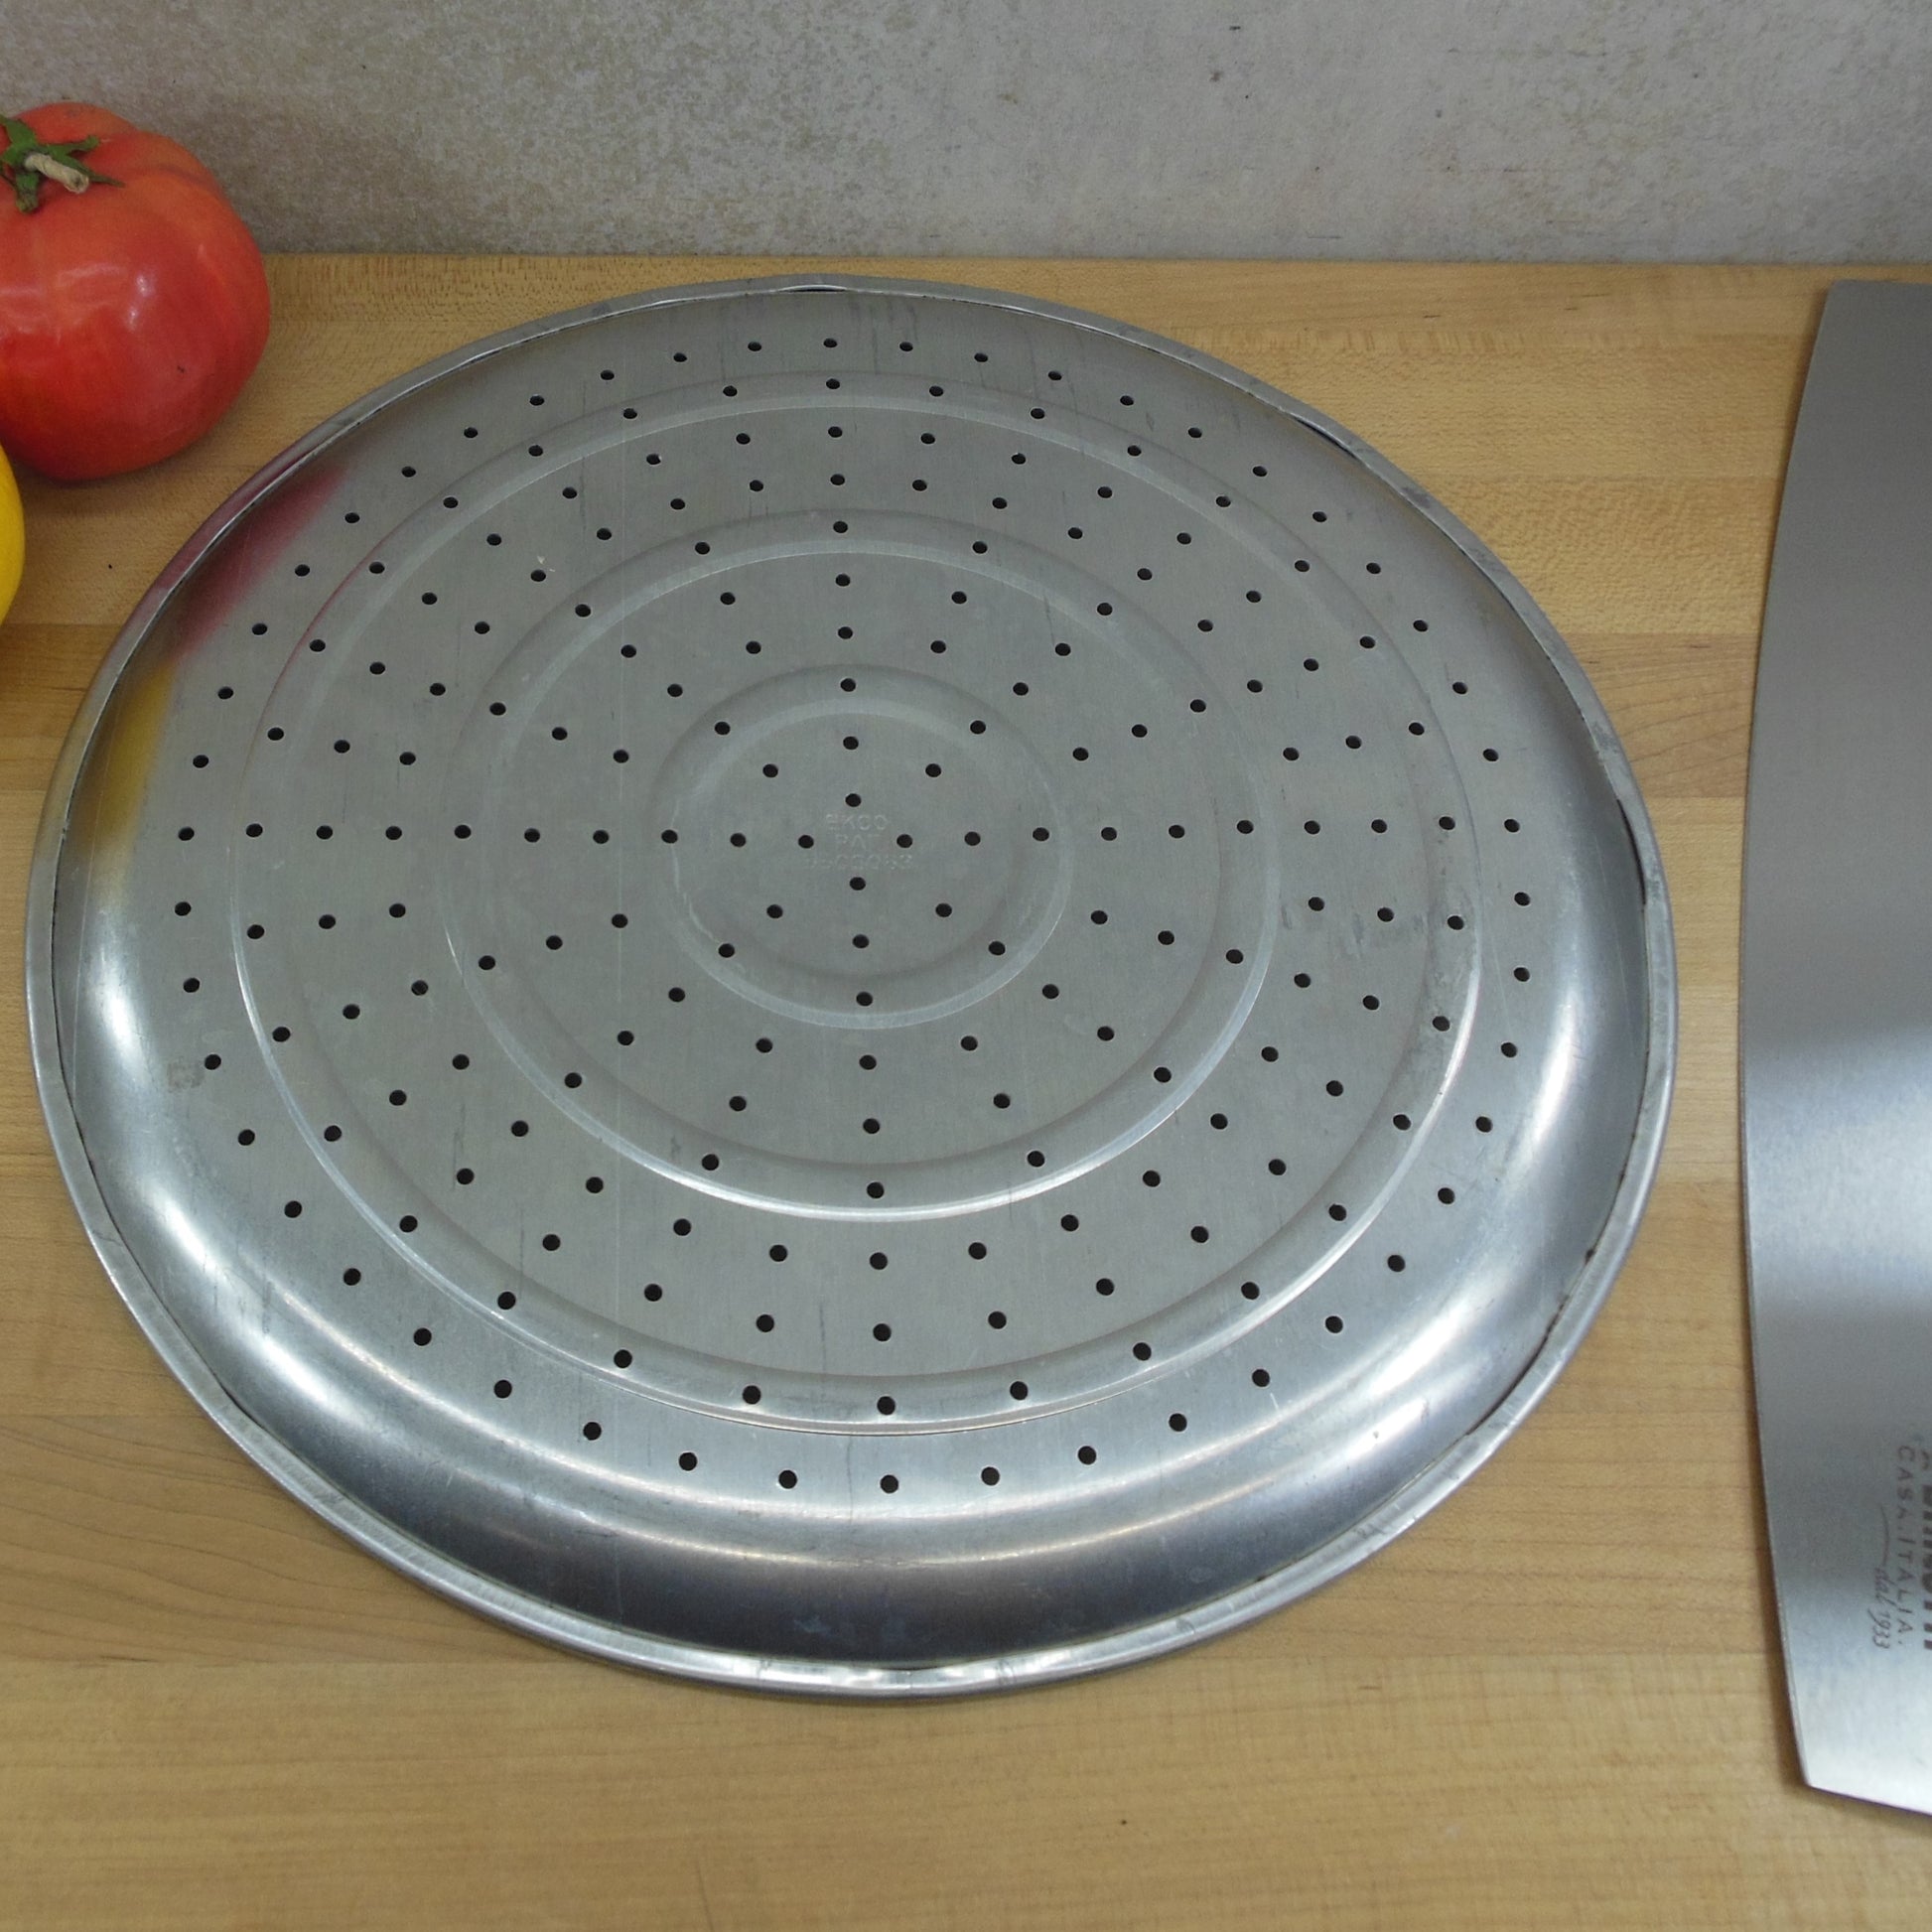 Ekco Perforated Aluminum Pizza Pan 13" & Bialetti Stainless Cutter used